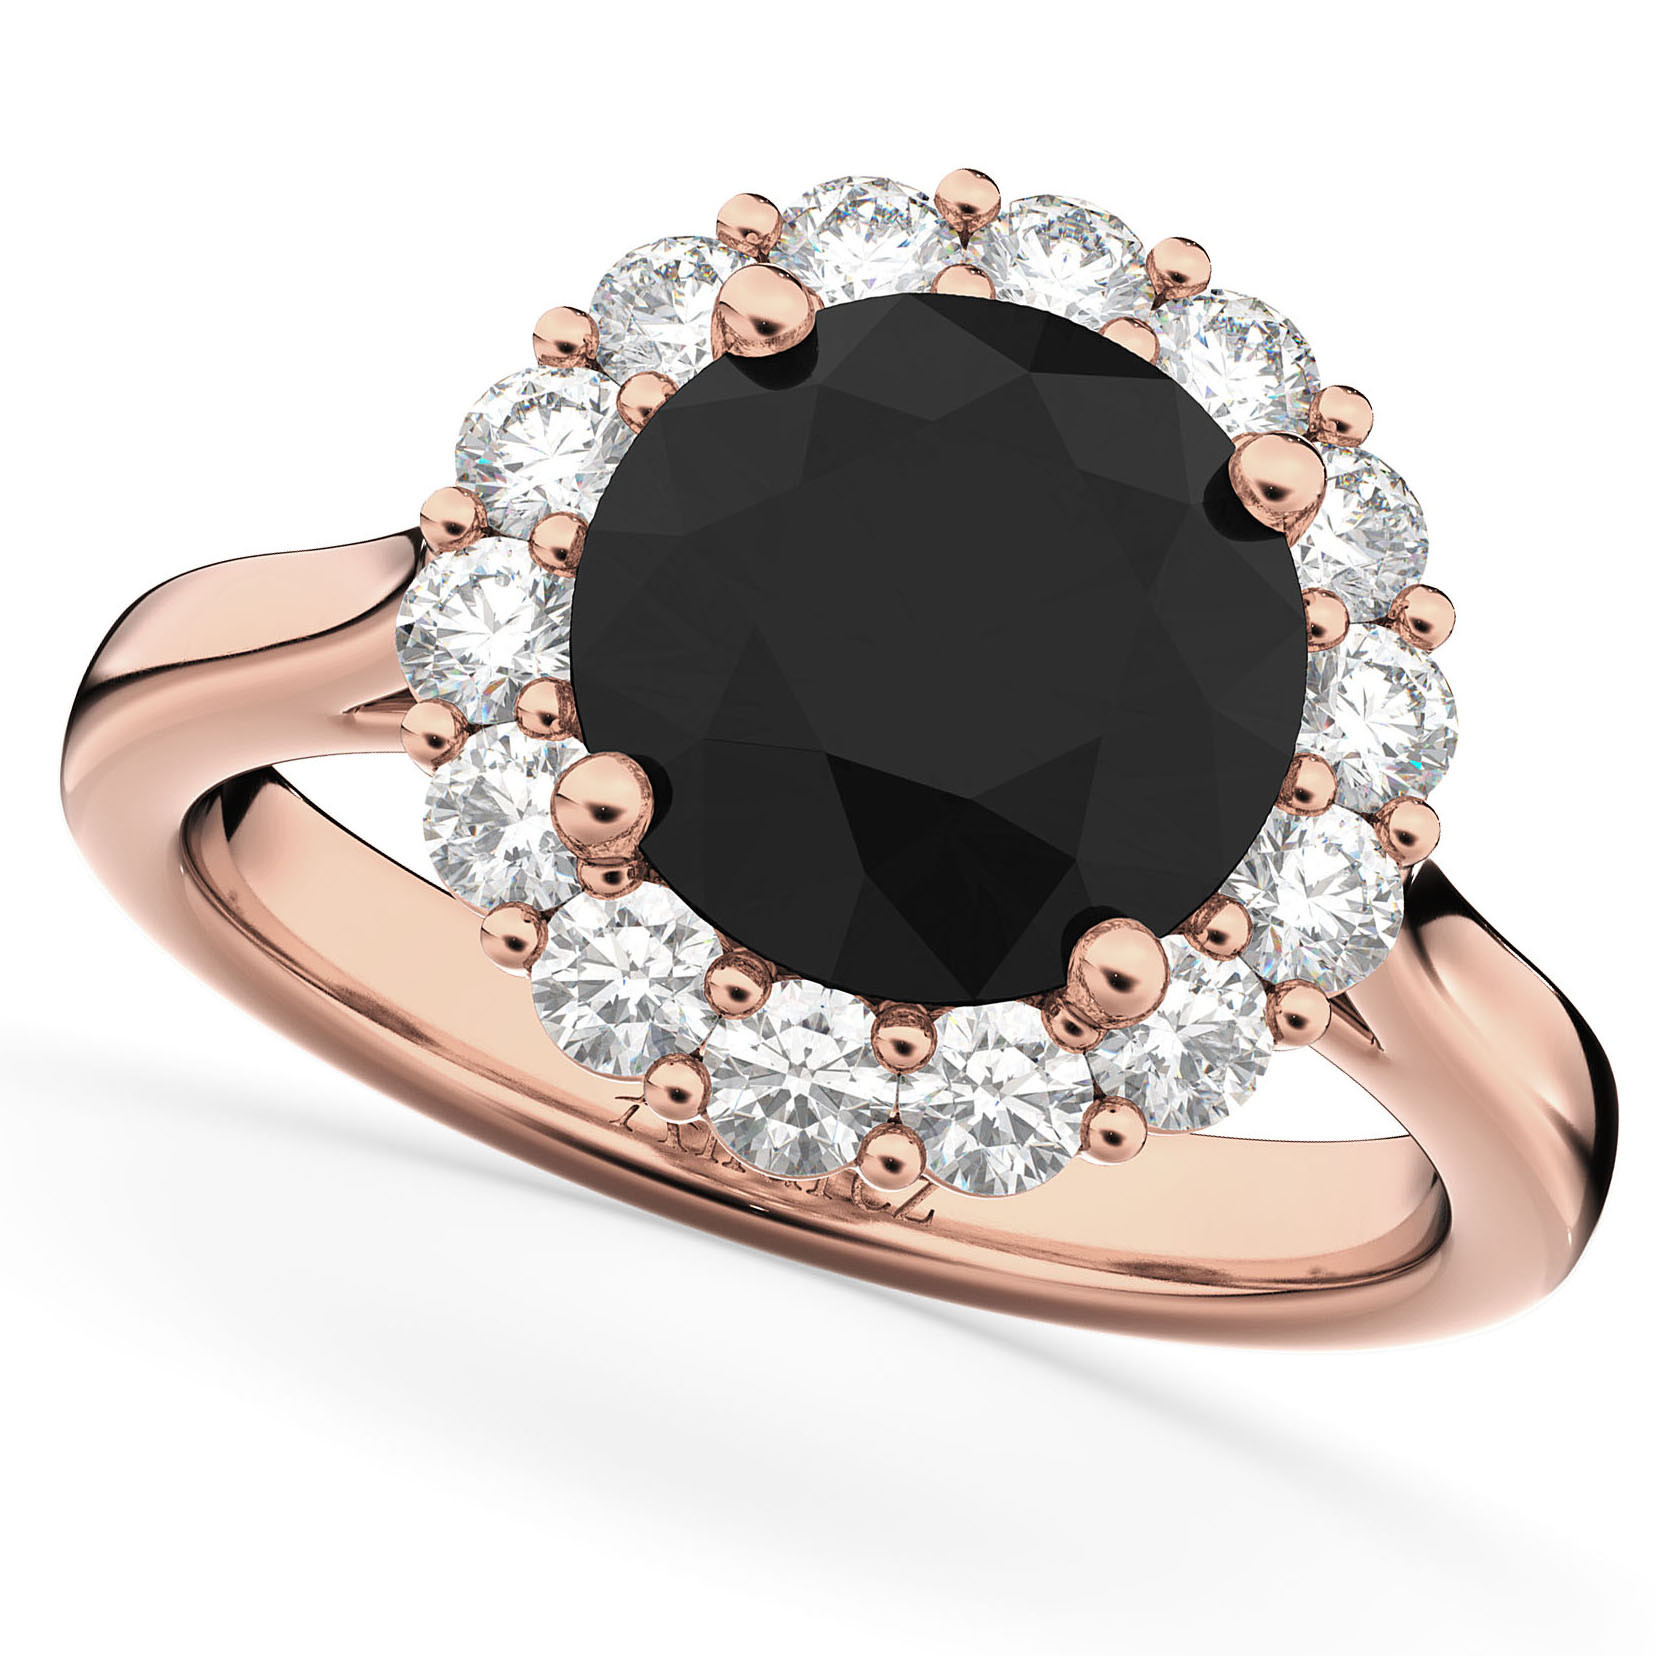 Black Diamond And Rose Gold Engagement Rings
 Round Black Diamond & Diamond Engagement Ring 14K Rose